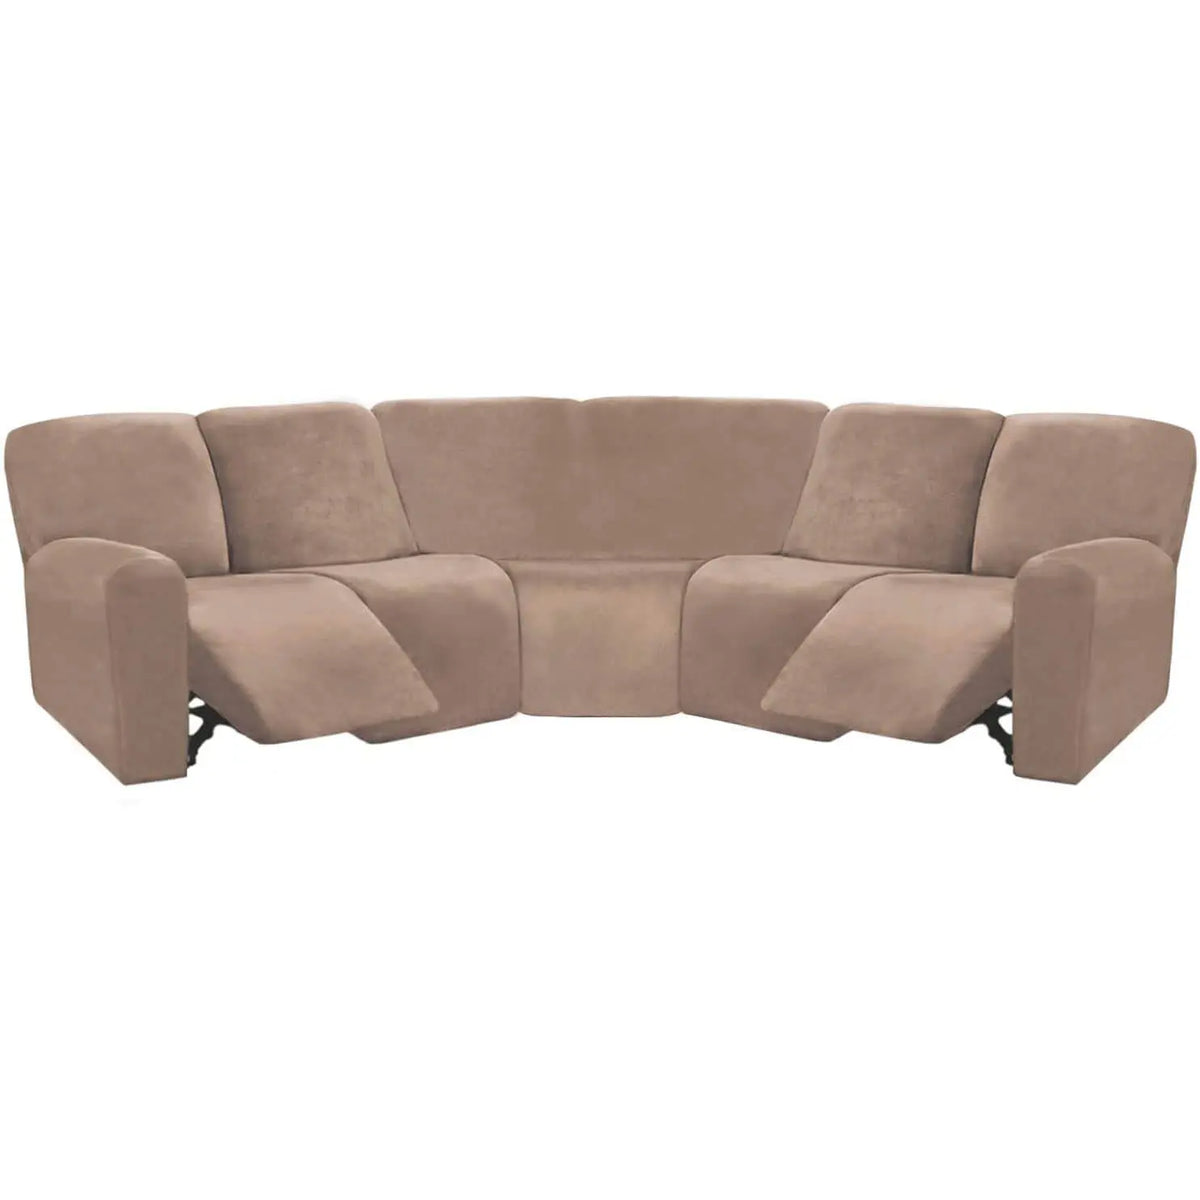 Crfatop 5-seater L Shape Sofa Cover with Recliner Light-Camel